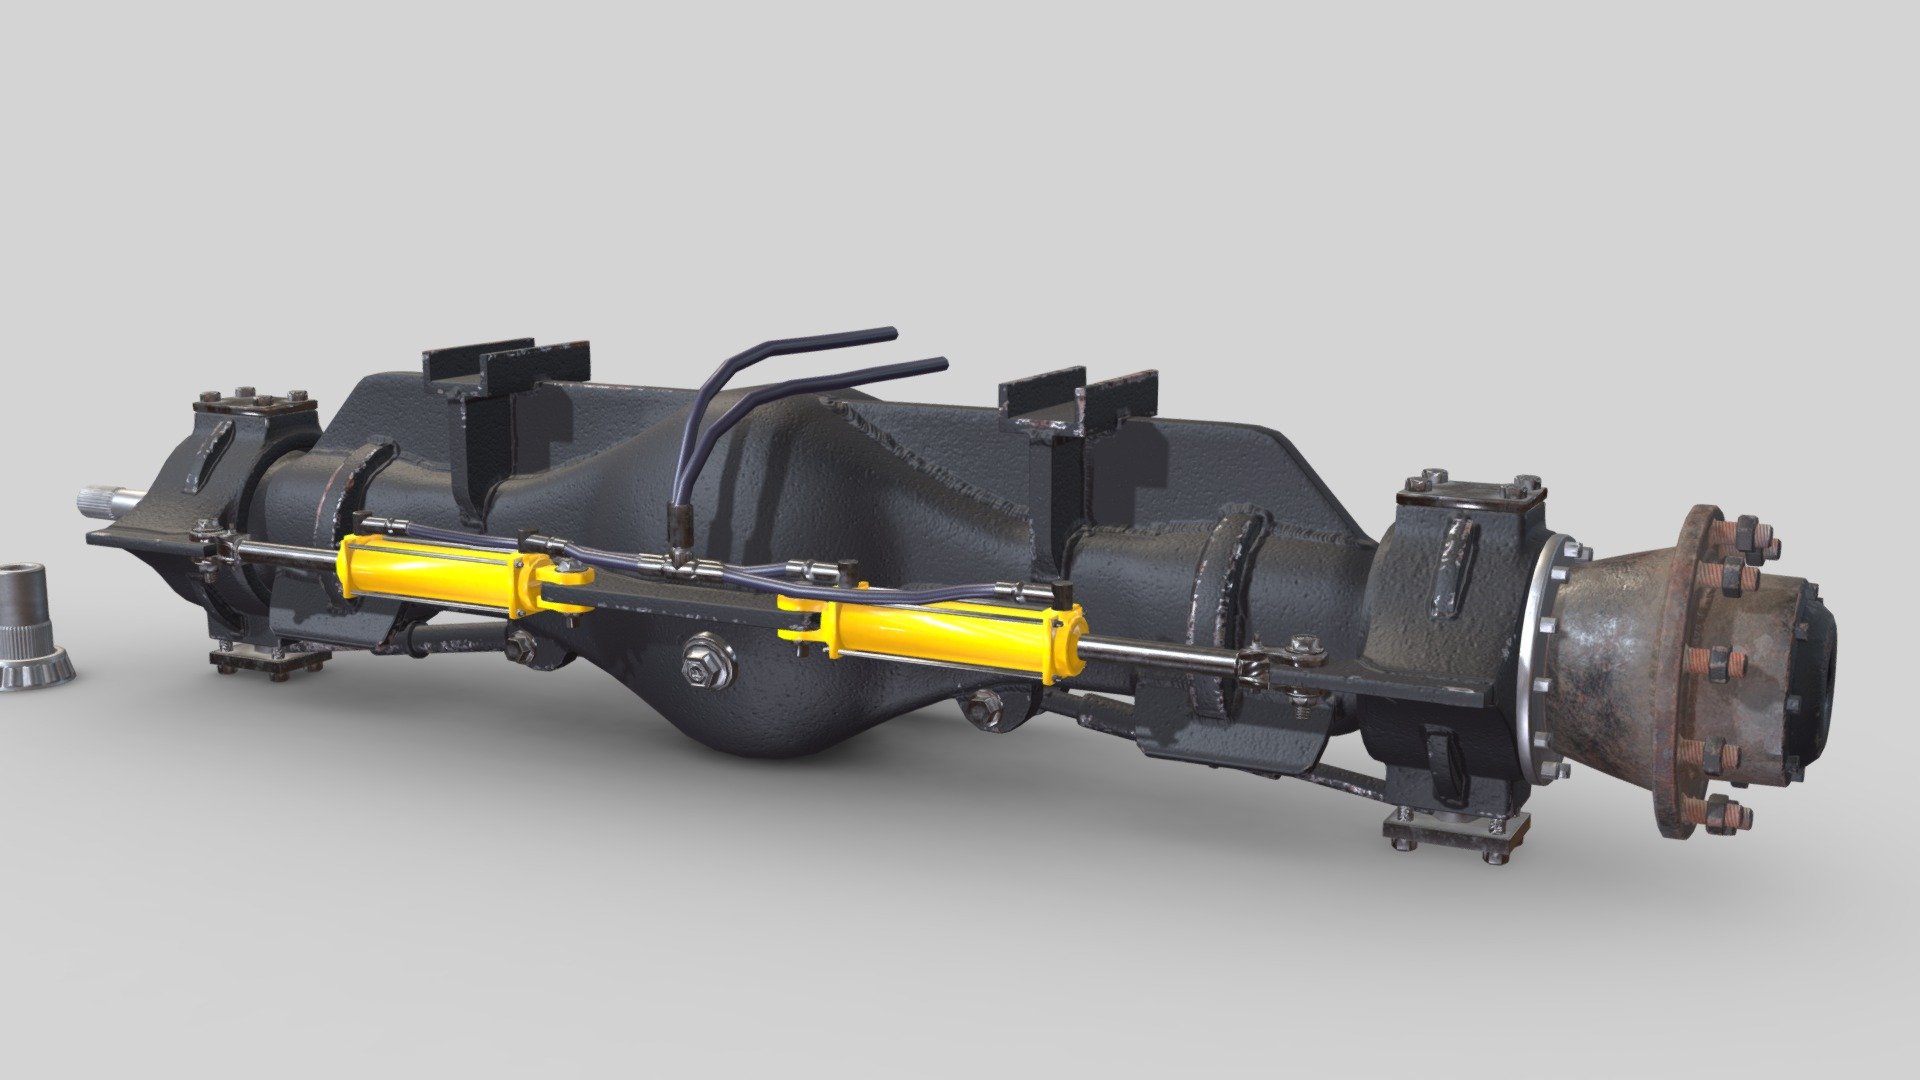 This is fairly accurate 15-ton Federal axle used by first two Grave Diggers.

Blog post about Grave Digger's axles:

https://www.artstation.com/jorma_rysky/blog/L8Ry/1961-15-ton-federal-axle

Sources for information:

http://monsterphoto.iwarp.com/den2a.htm

http://monsterphoto.iwarp.com/den2.htm

I do not own name Grave Digger, nor I'm anyway affiliated with Feld Motorsports. These axles are generic axles by Federal, and my model does not have any copyrighted stuff, all the logos and markings are removed/were never there.

Additional files includes Blender and Substance Painter-projects, and all the textures before baking them together with Simple Bake. Main colour of axle is adjustable in Blender 3d model